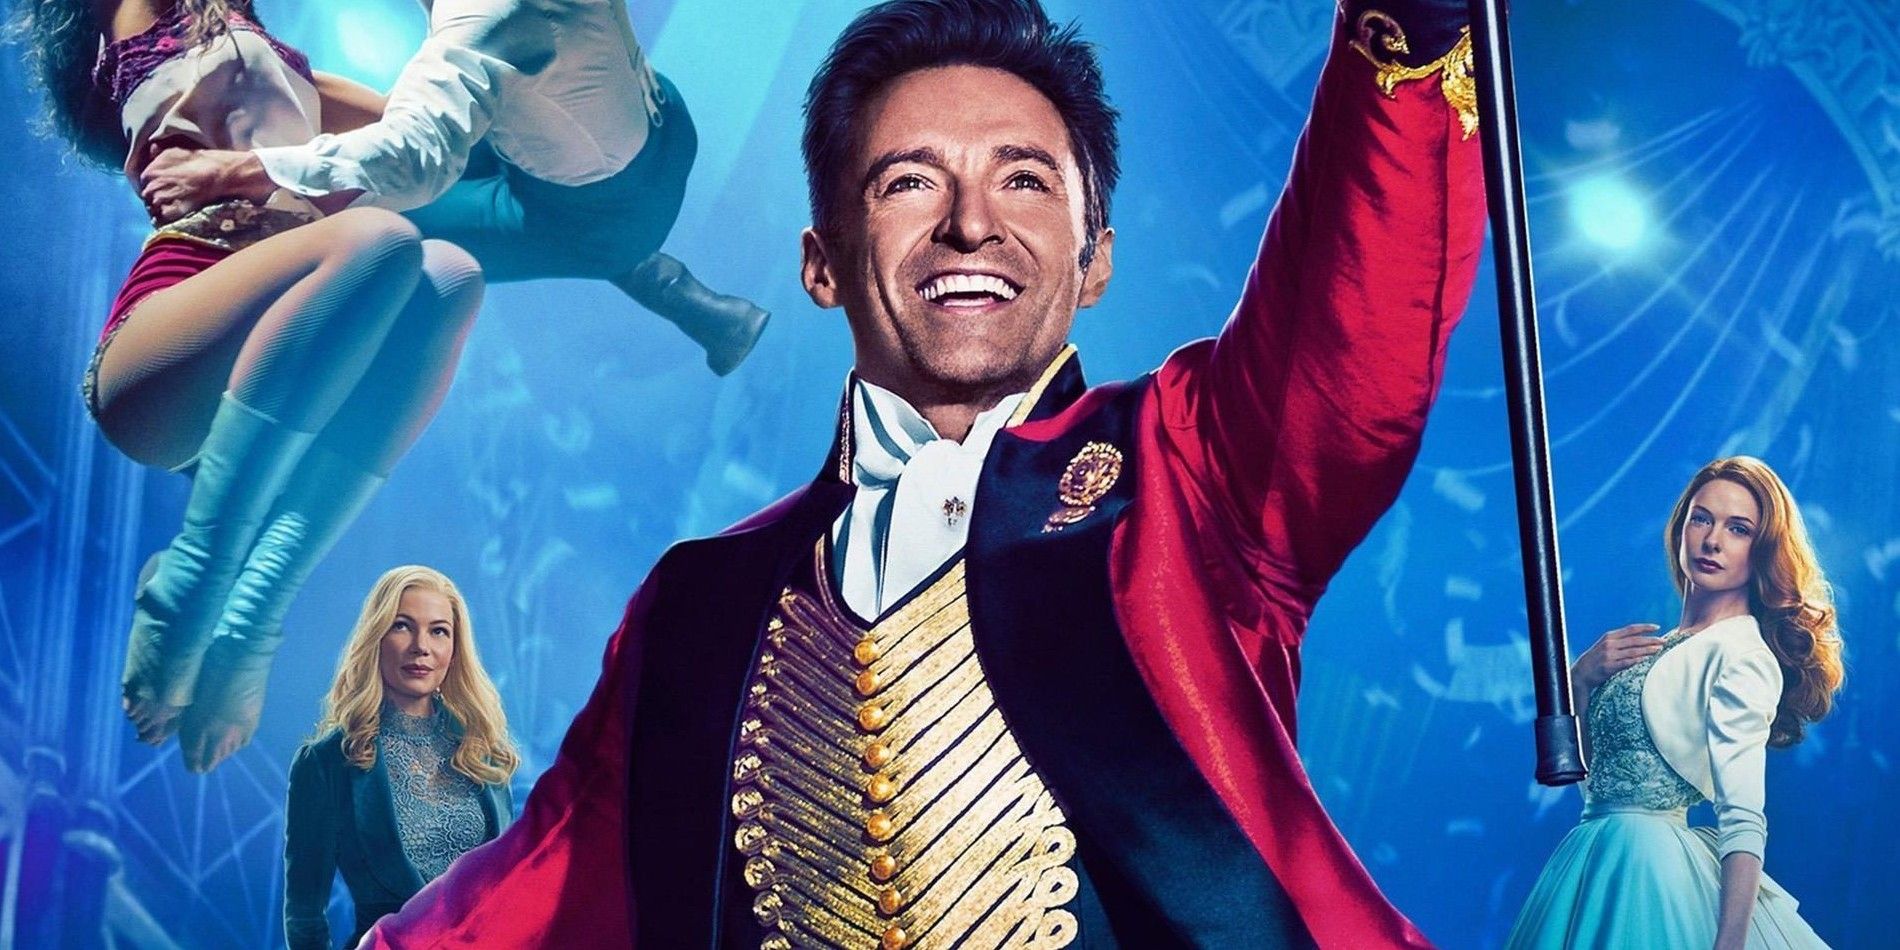 the greatest showman ost mp3